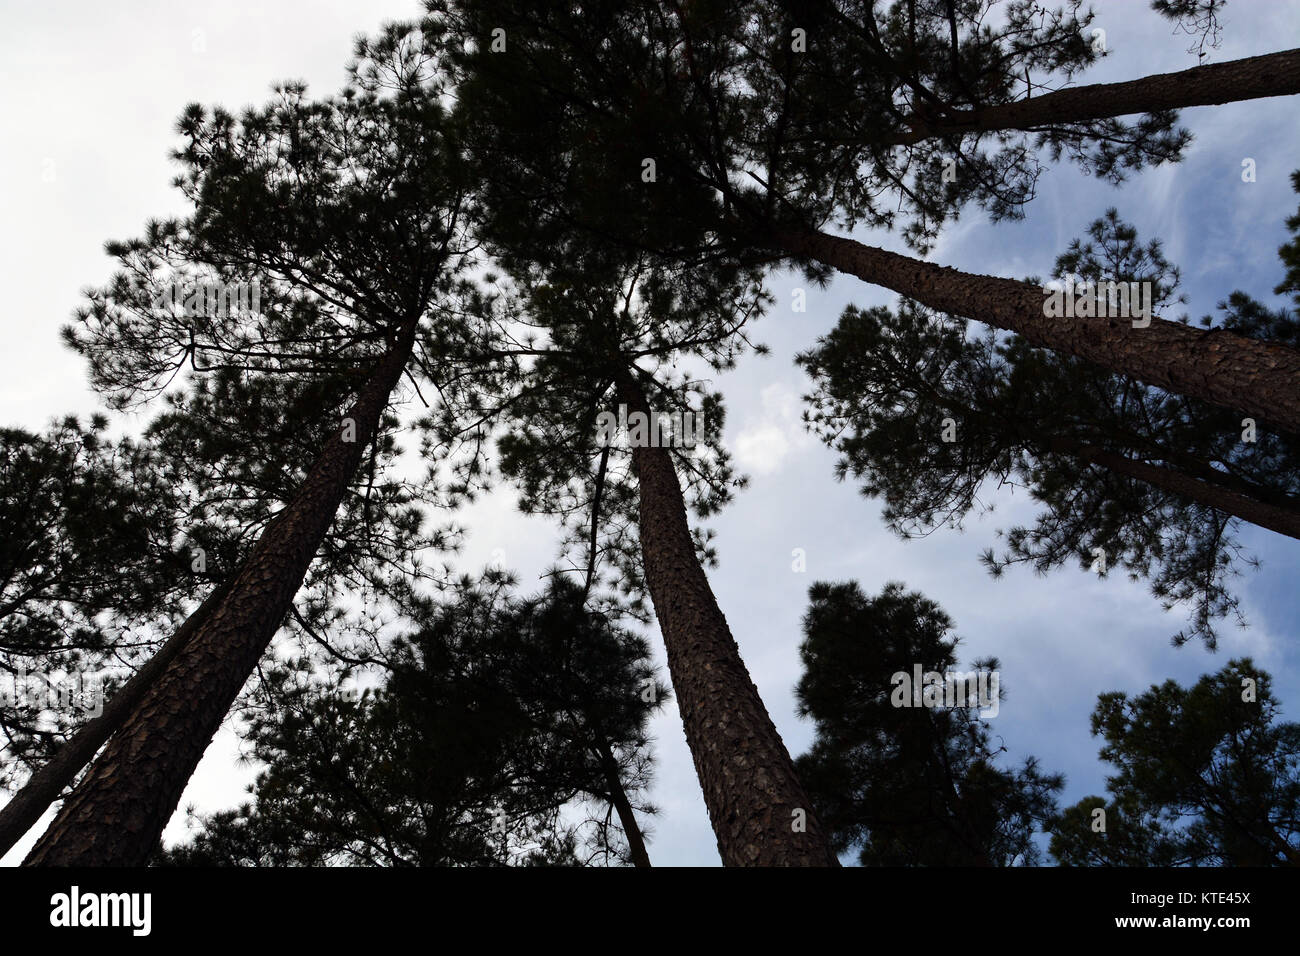 Loblolly or Yellow Pines silhouetted against the sky in the Albemarle Sound area of North Carolina Stock Photo